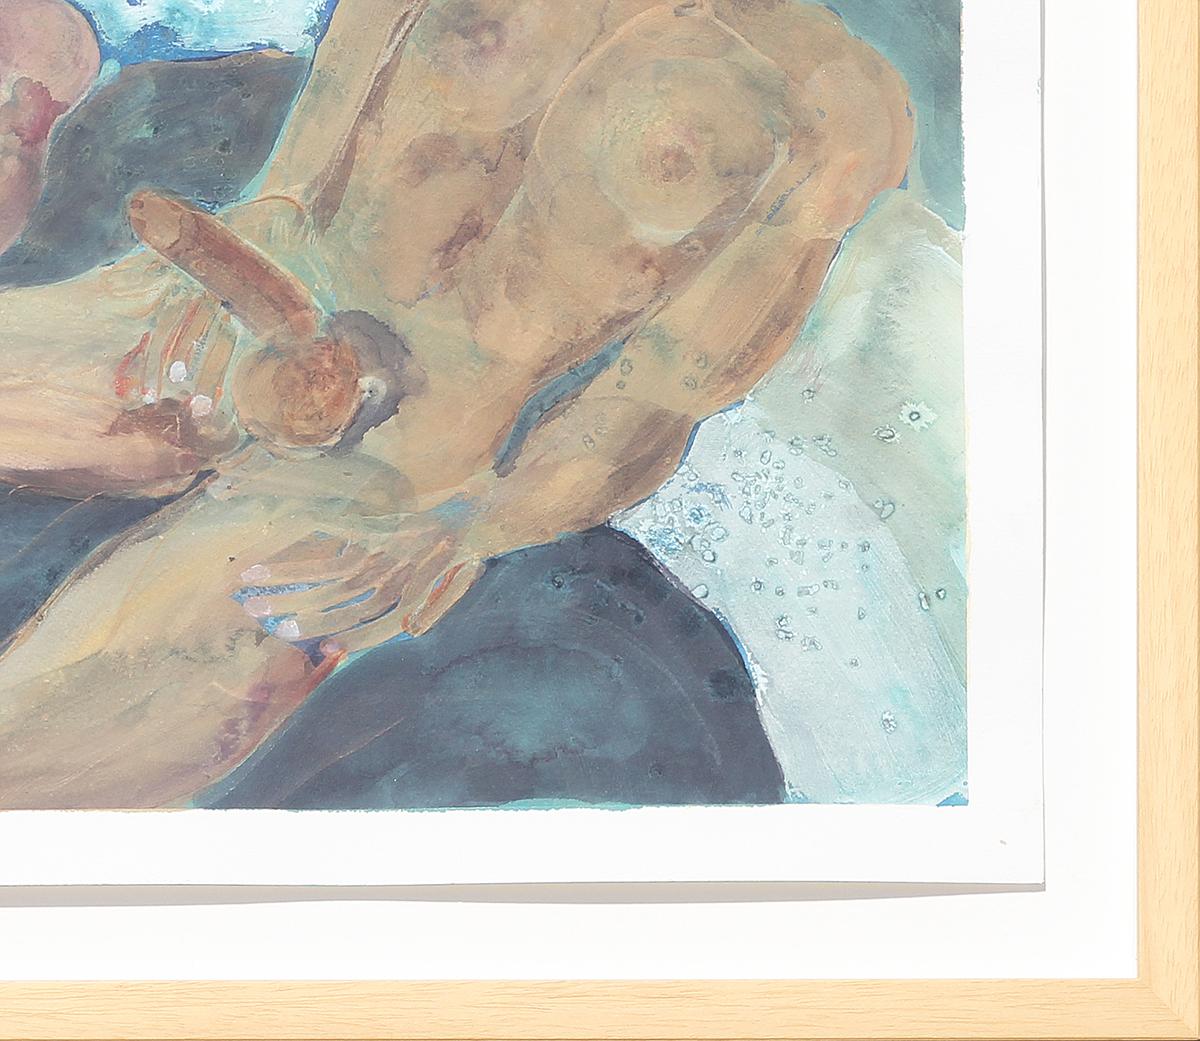 Dark blue toned homoerotic figurative watercolor painting by contemporary Houston, Texas artist Steve Louis. The work features two nude men stretched out on a blue bed in an intimate, sensual position. Currently hung in a light wood floating frame.